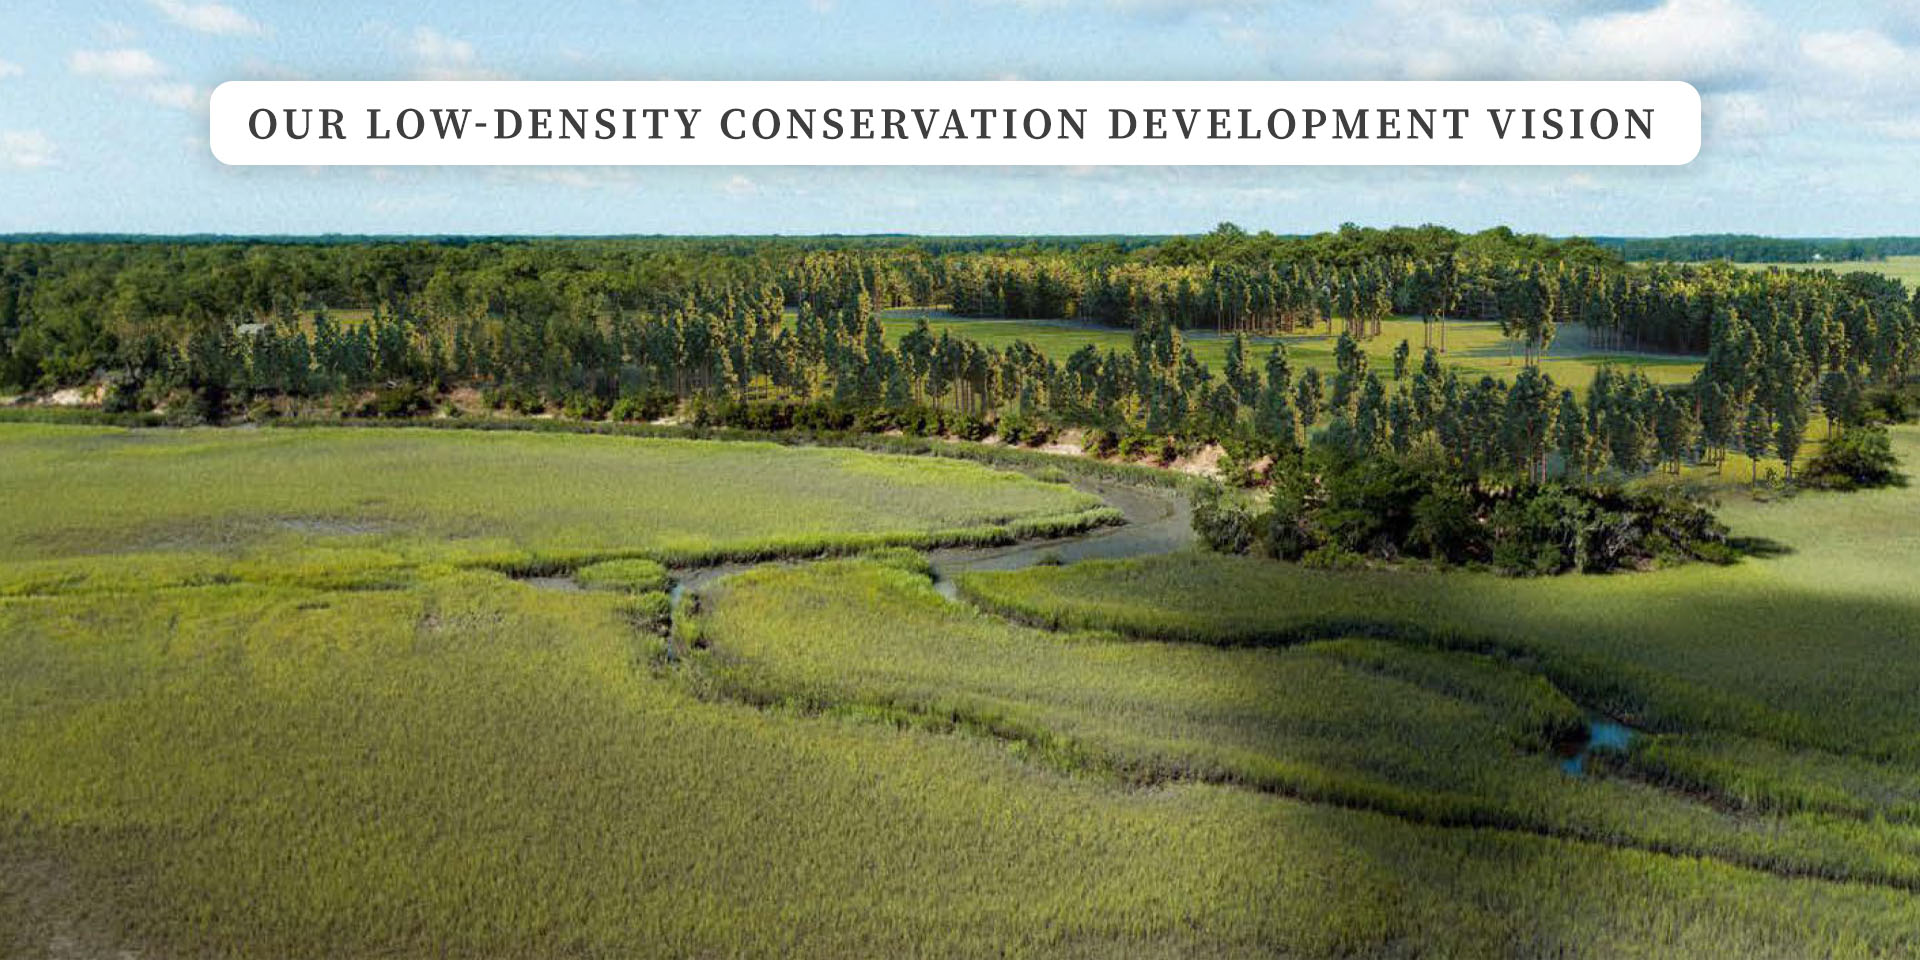 Looking from Pine Island: Our Low-Density Conservation Development Vision